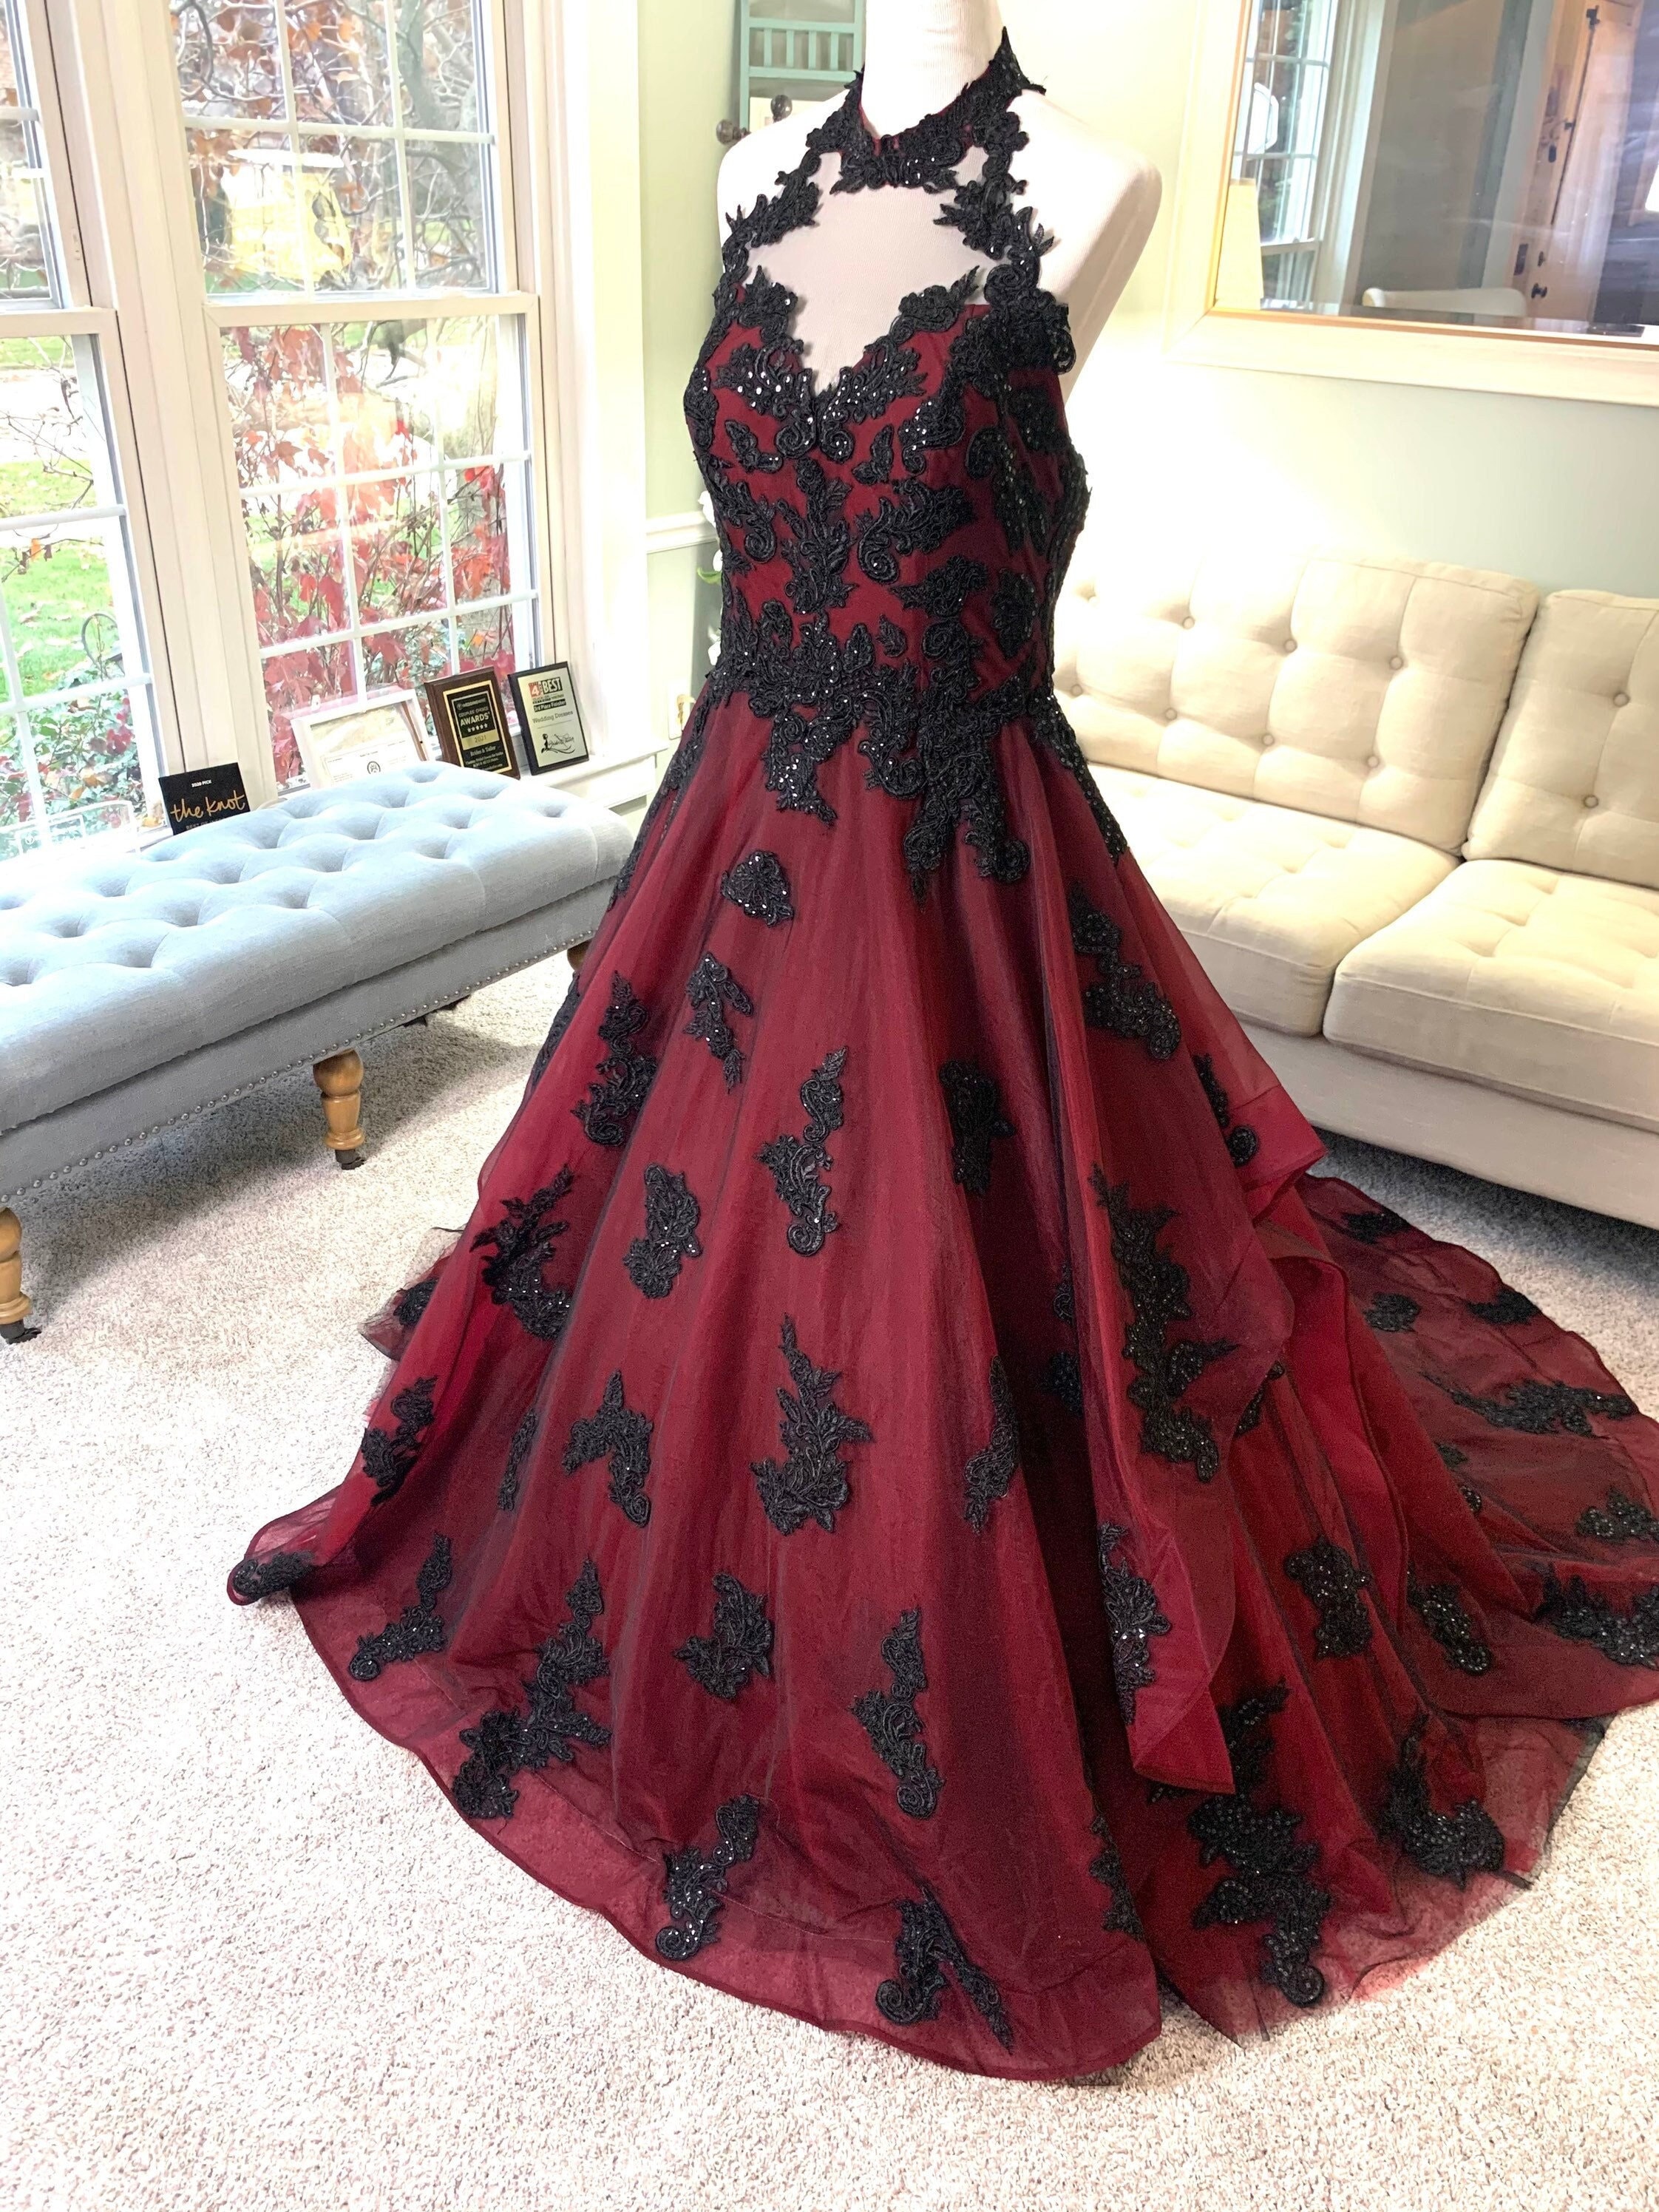 BLACK GOWN WITH RED DRAPING STYLE PATTERN